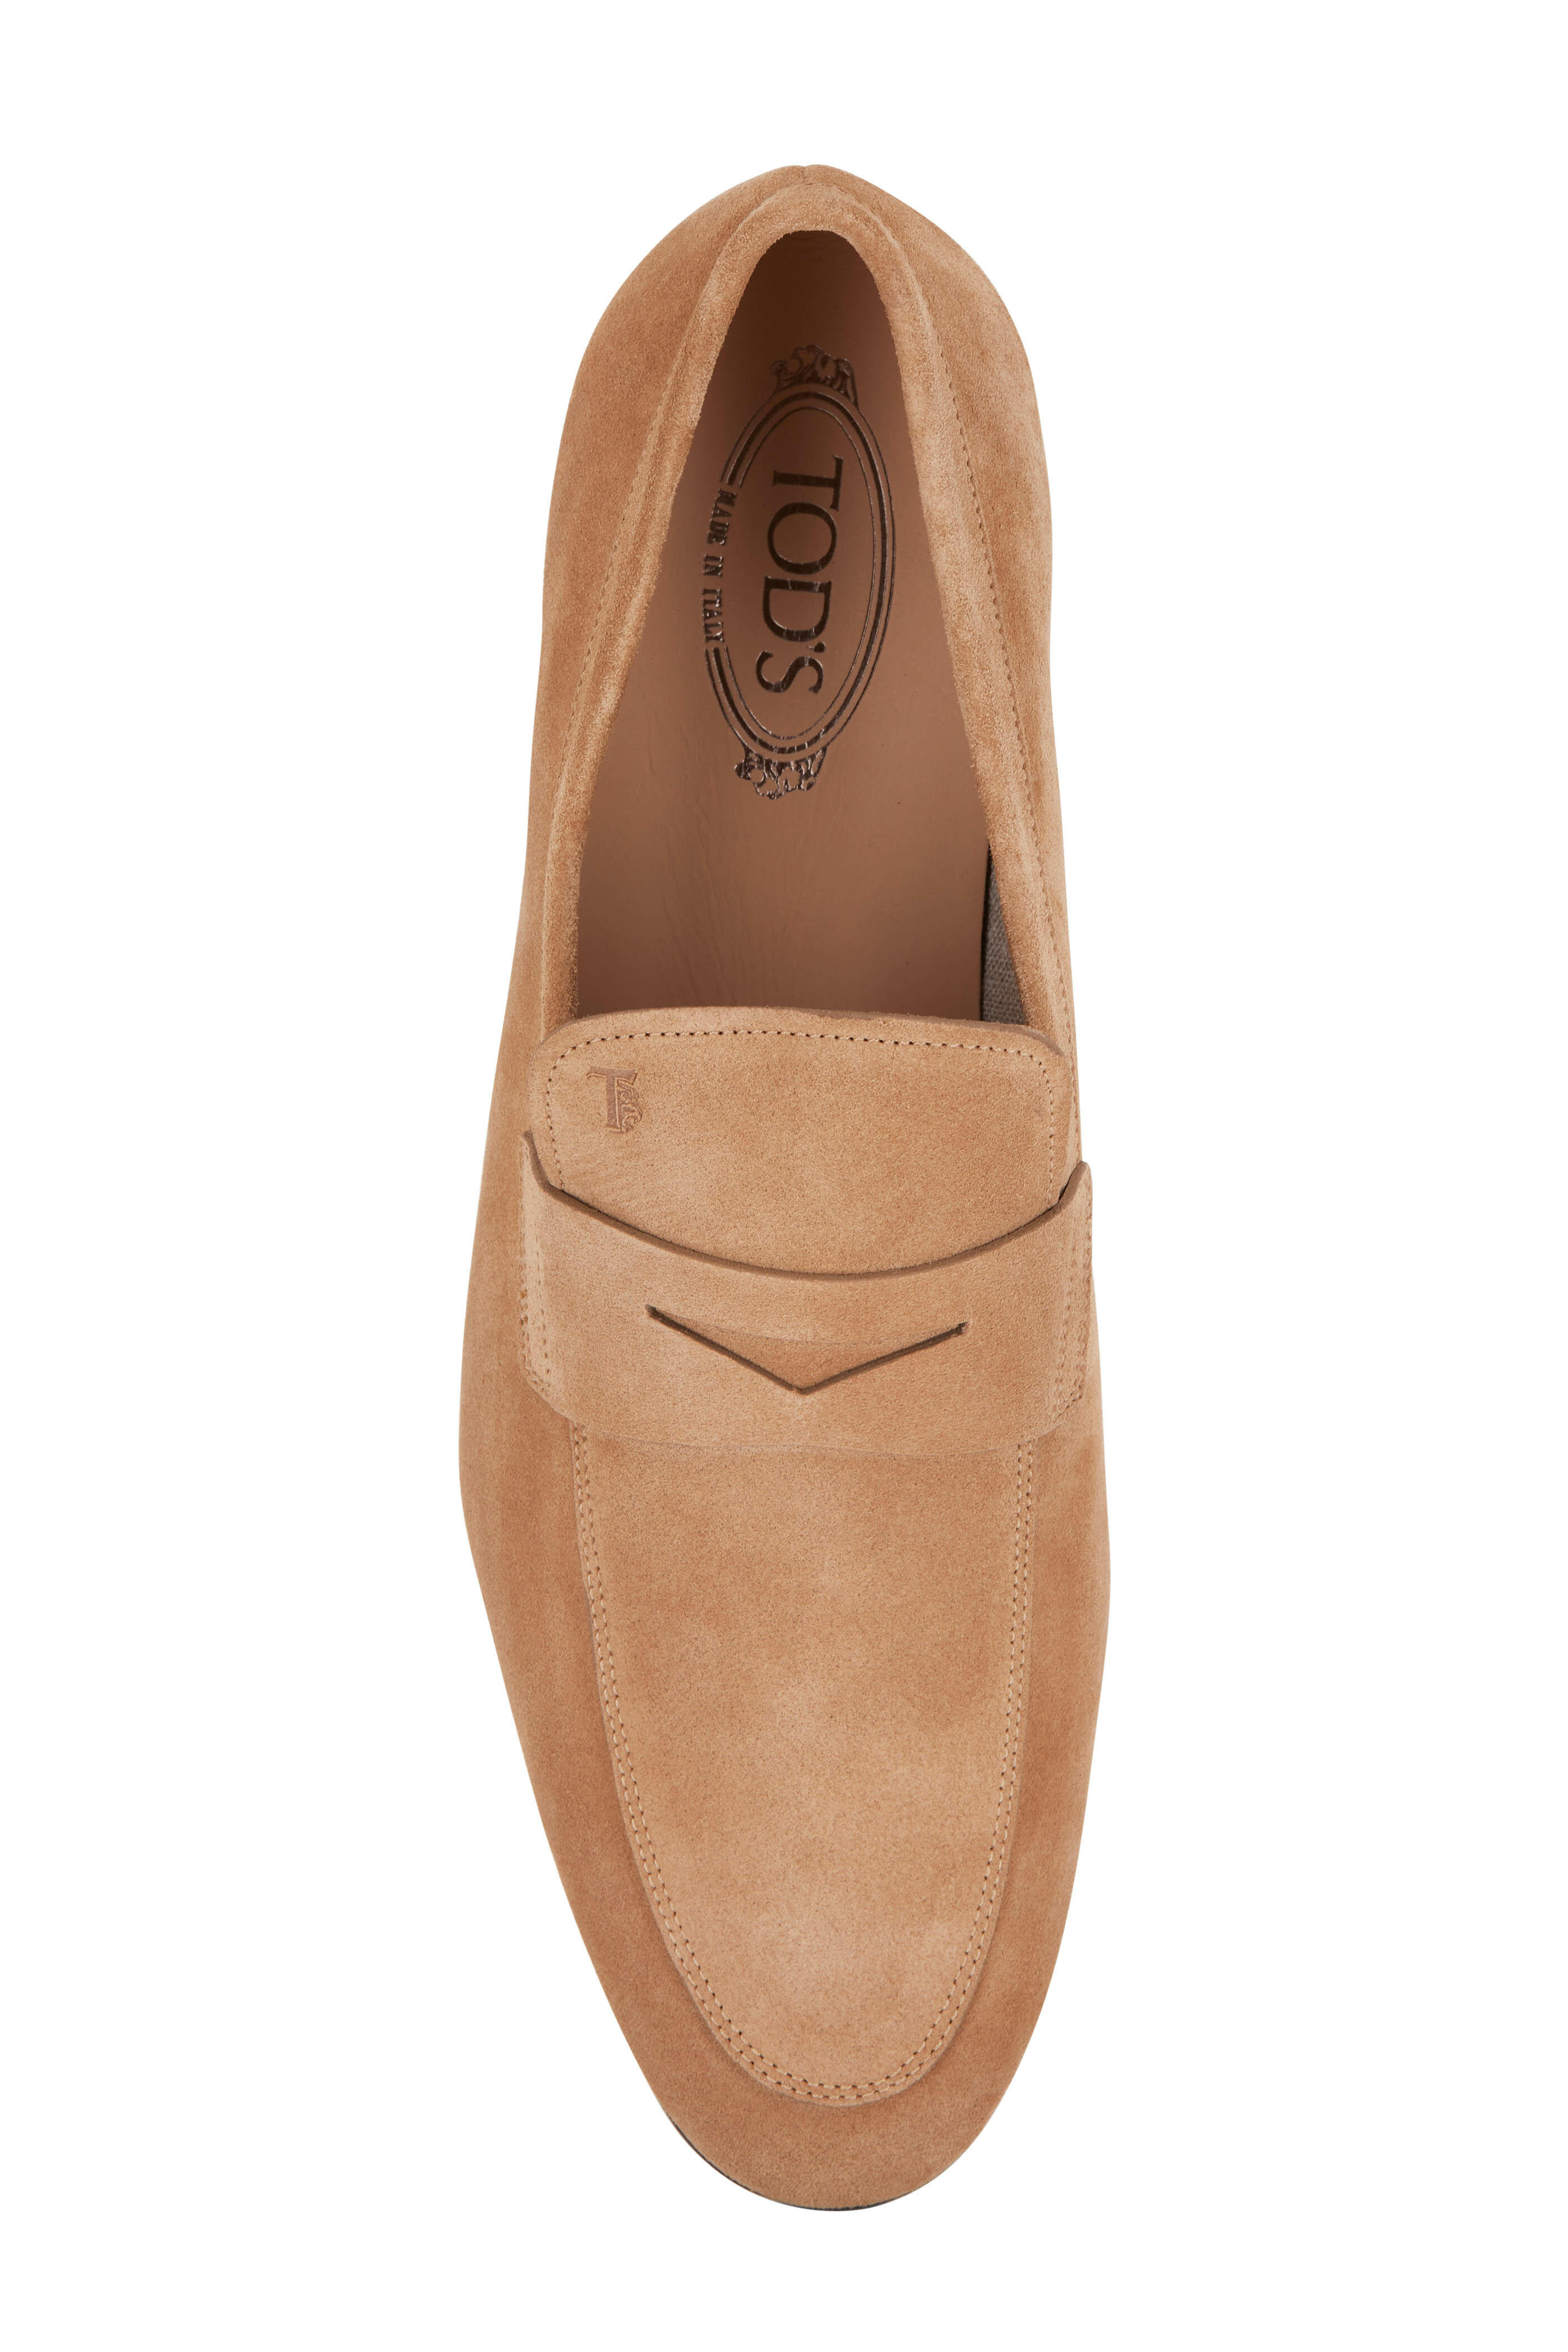 Tod's - Tan Suede Penny Loafer Mitchell Stores